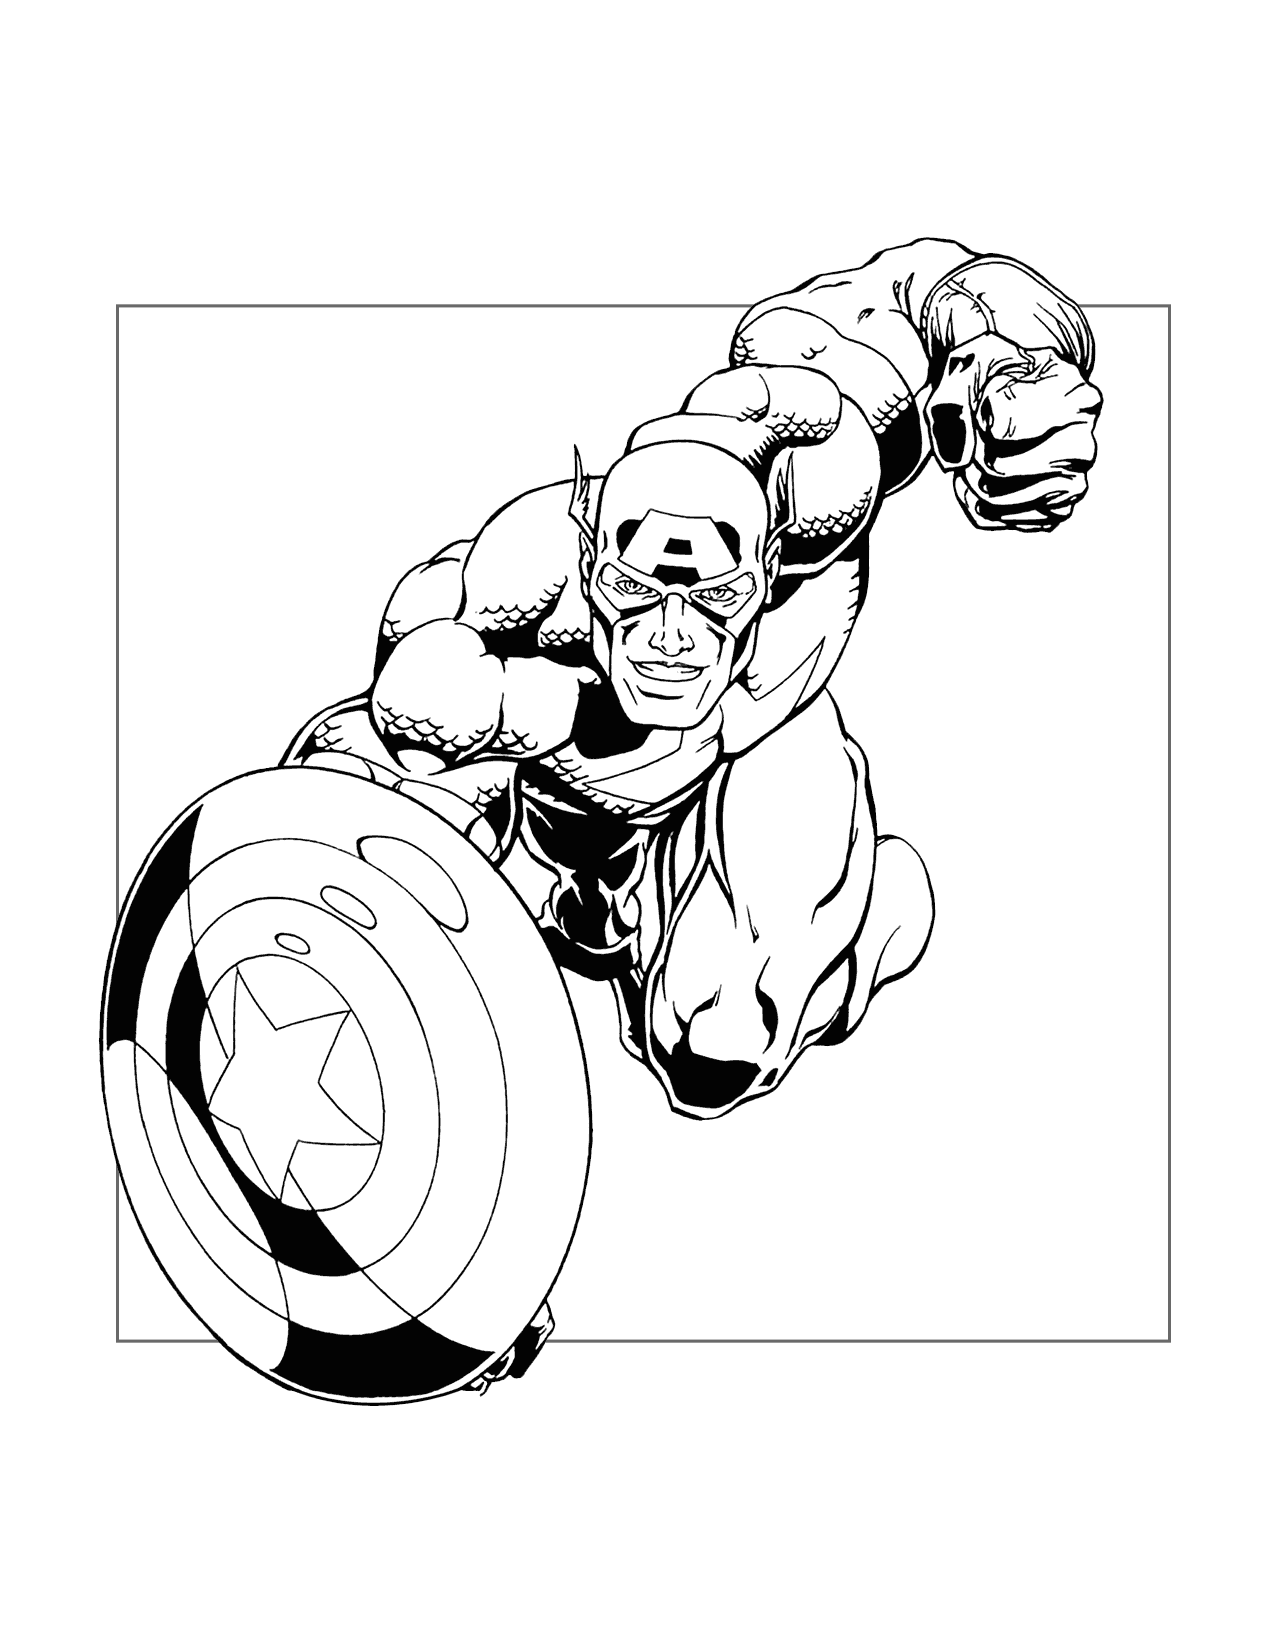 Old School Captain America With Winged Helmet Coloring Page